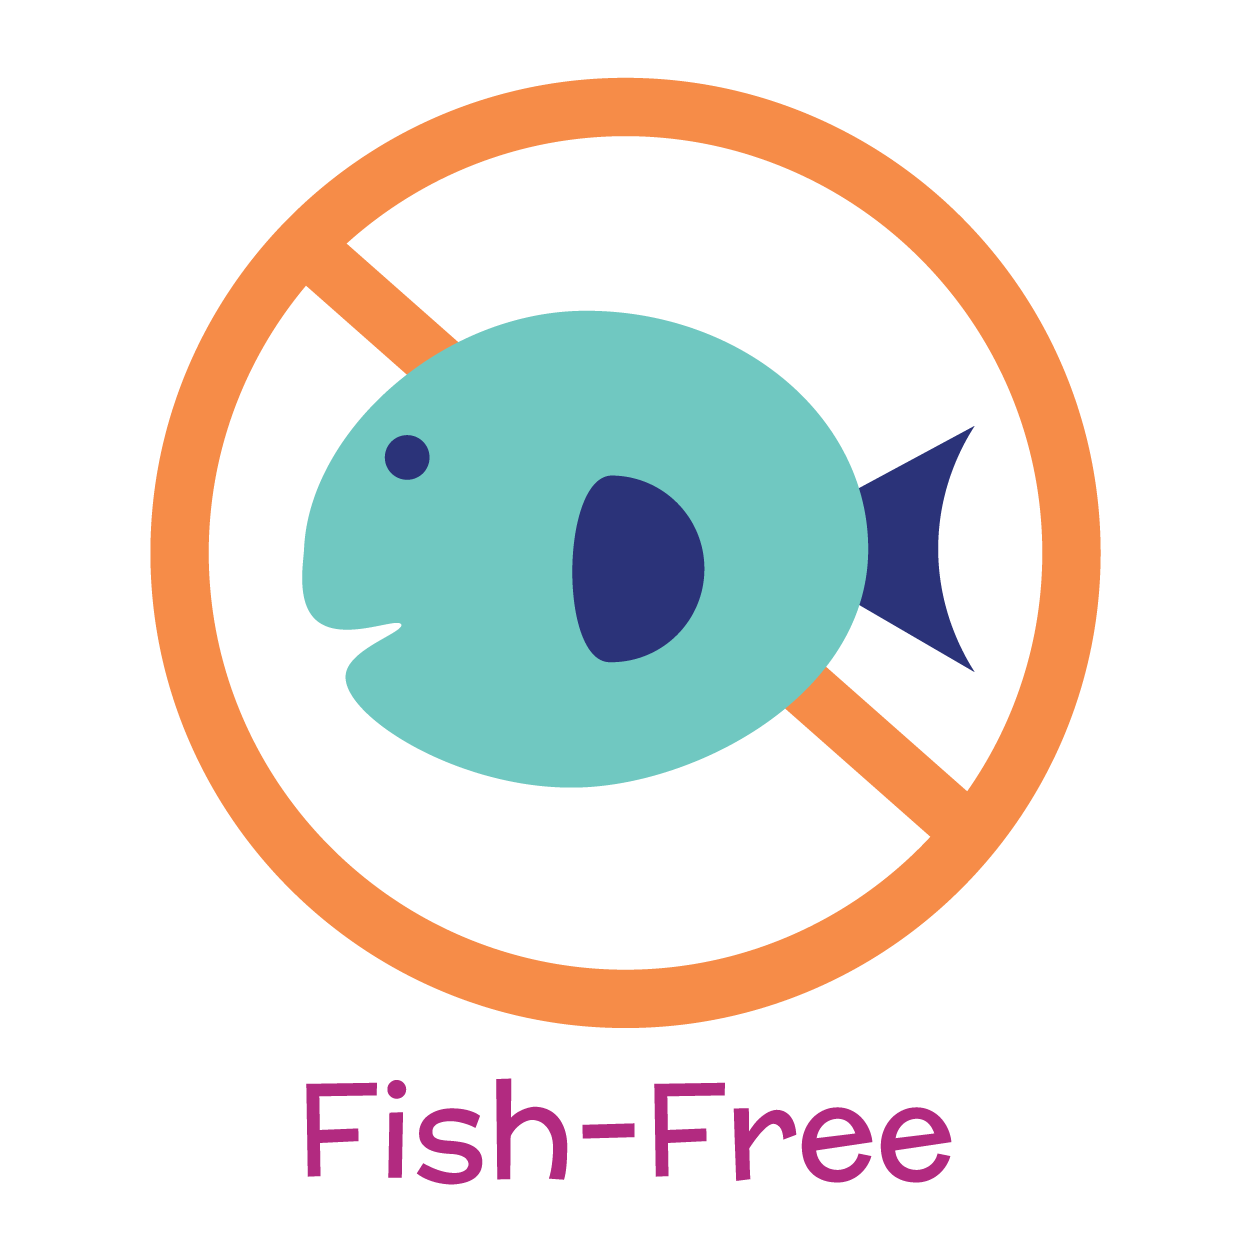 Copy of Copy of Copy of Copy of Copy of fish-free-icon-nomster-chef